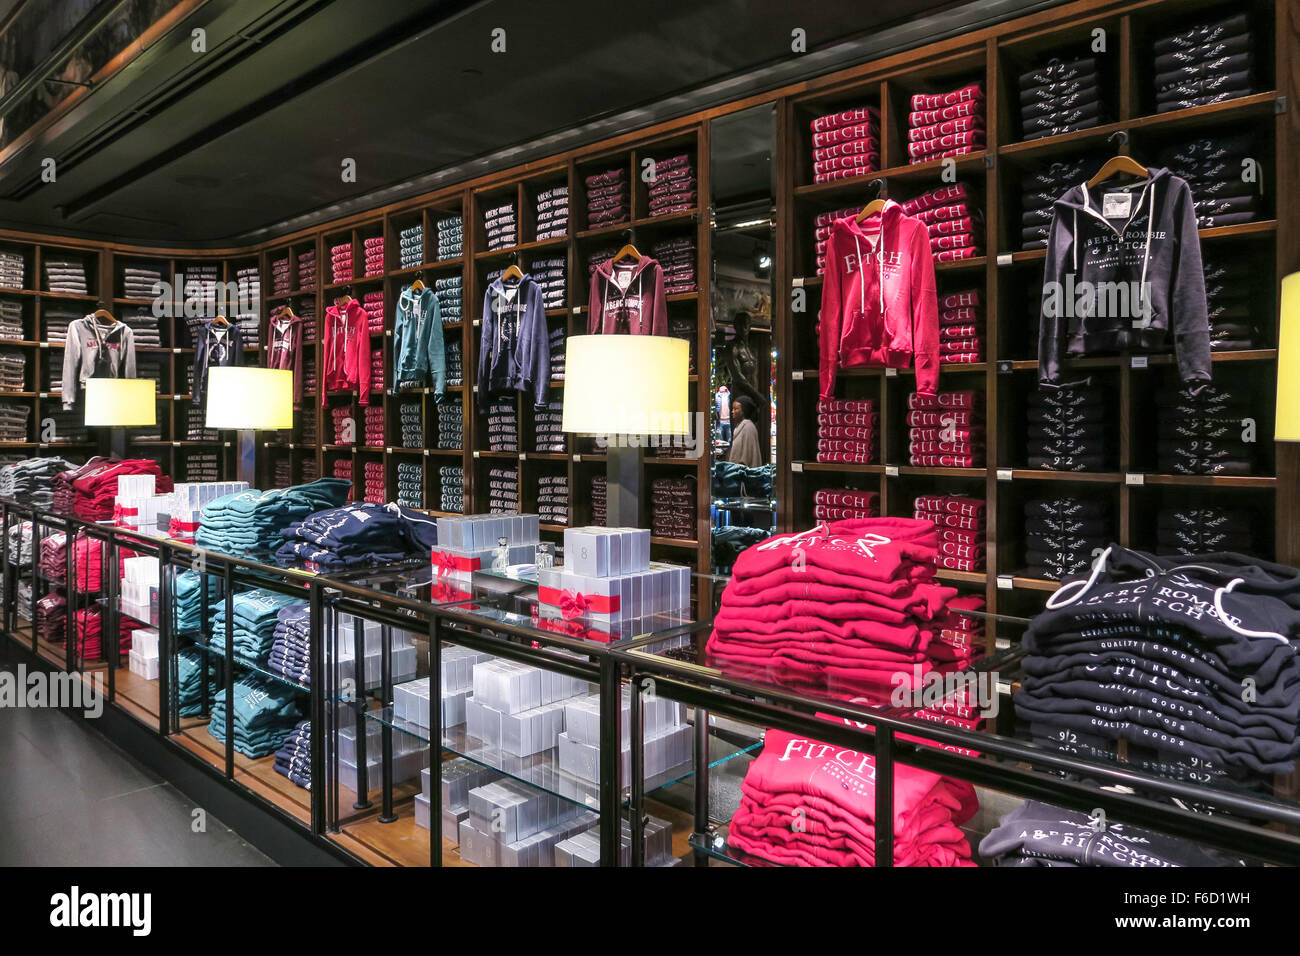 Abercrombie & Fitch Flagship Store Interior, Fifth Avenue, NYC Stock Photo  - Alamy